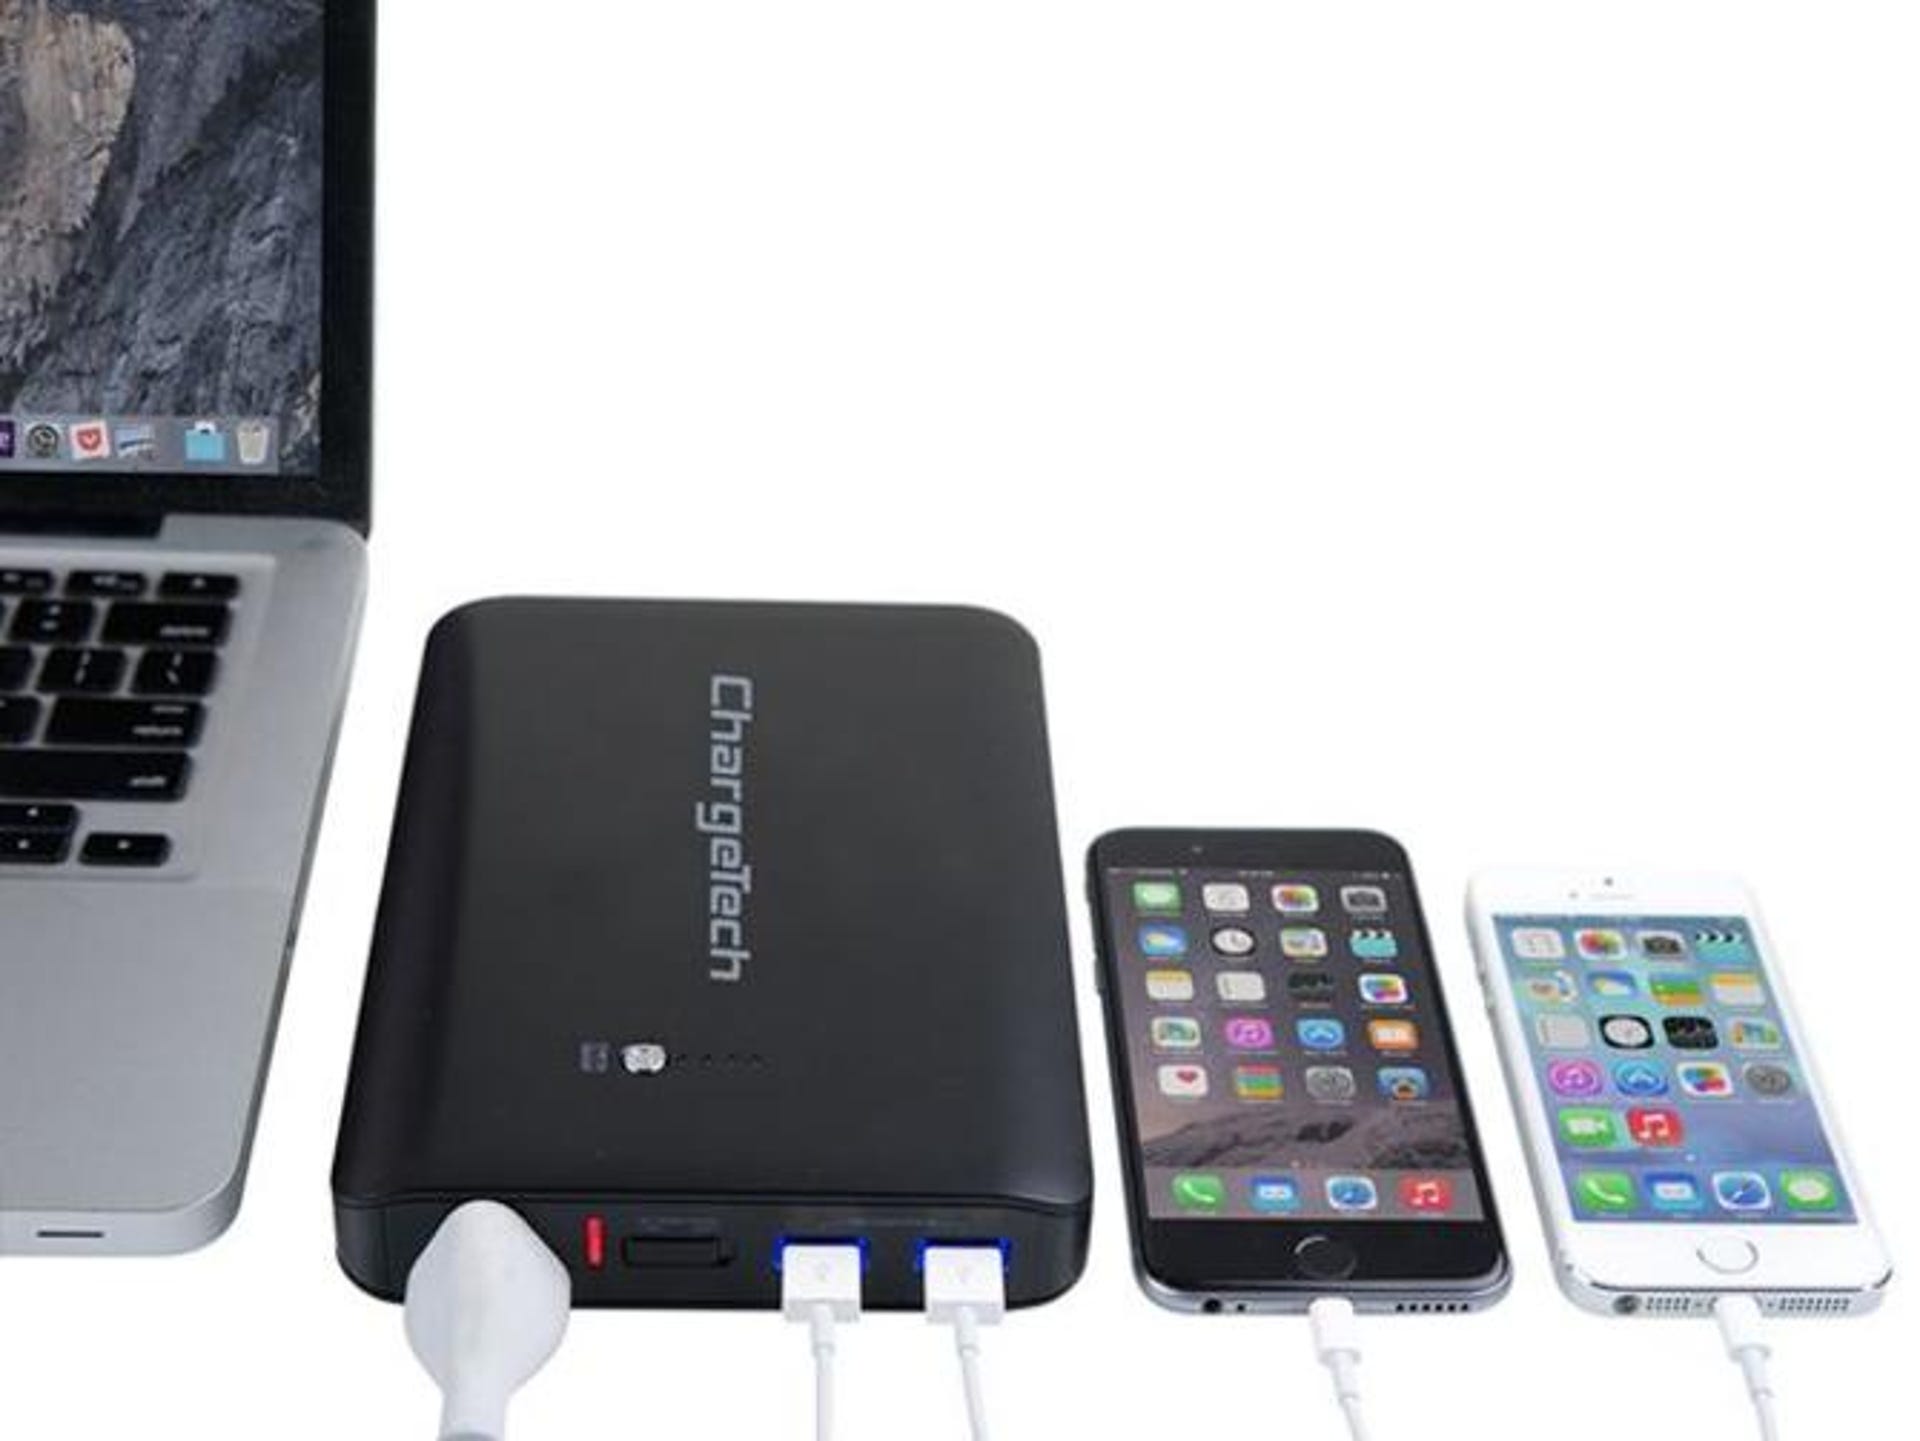 Portable Laptop Charger